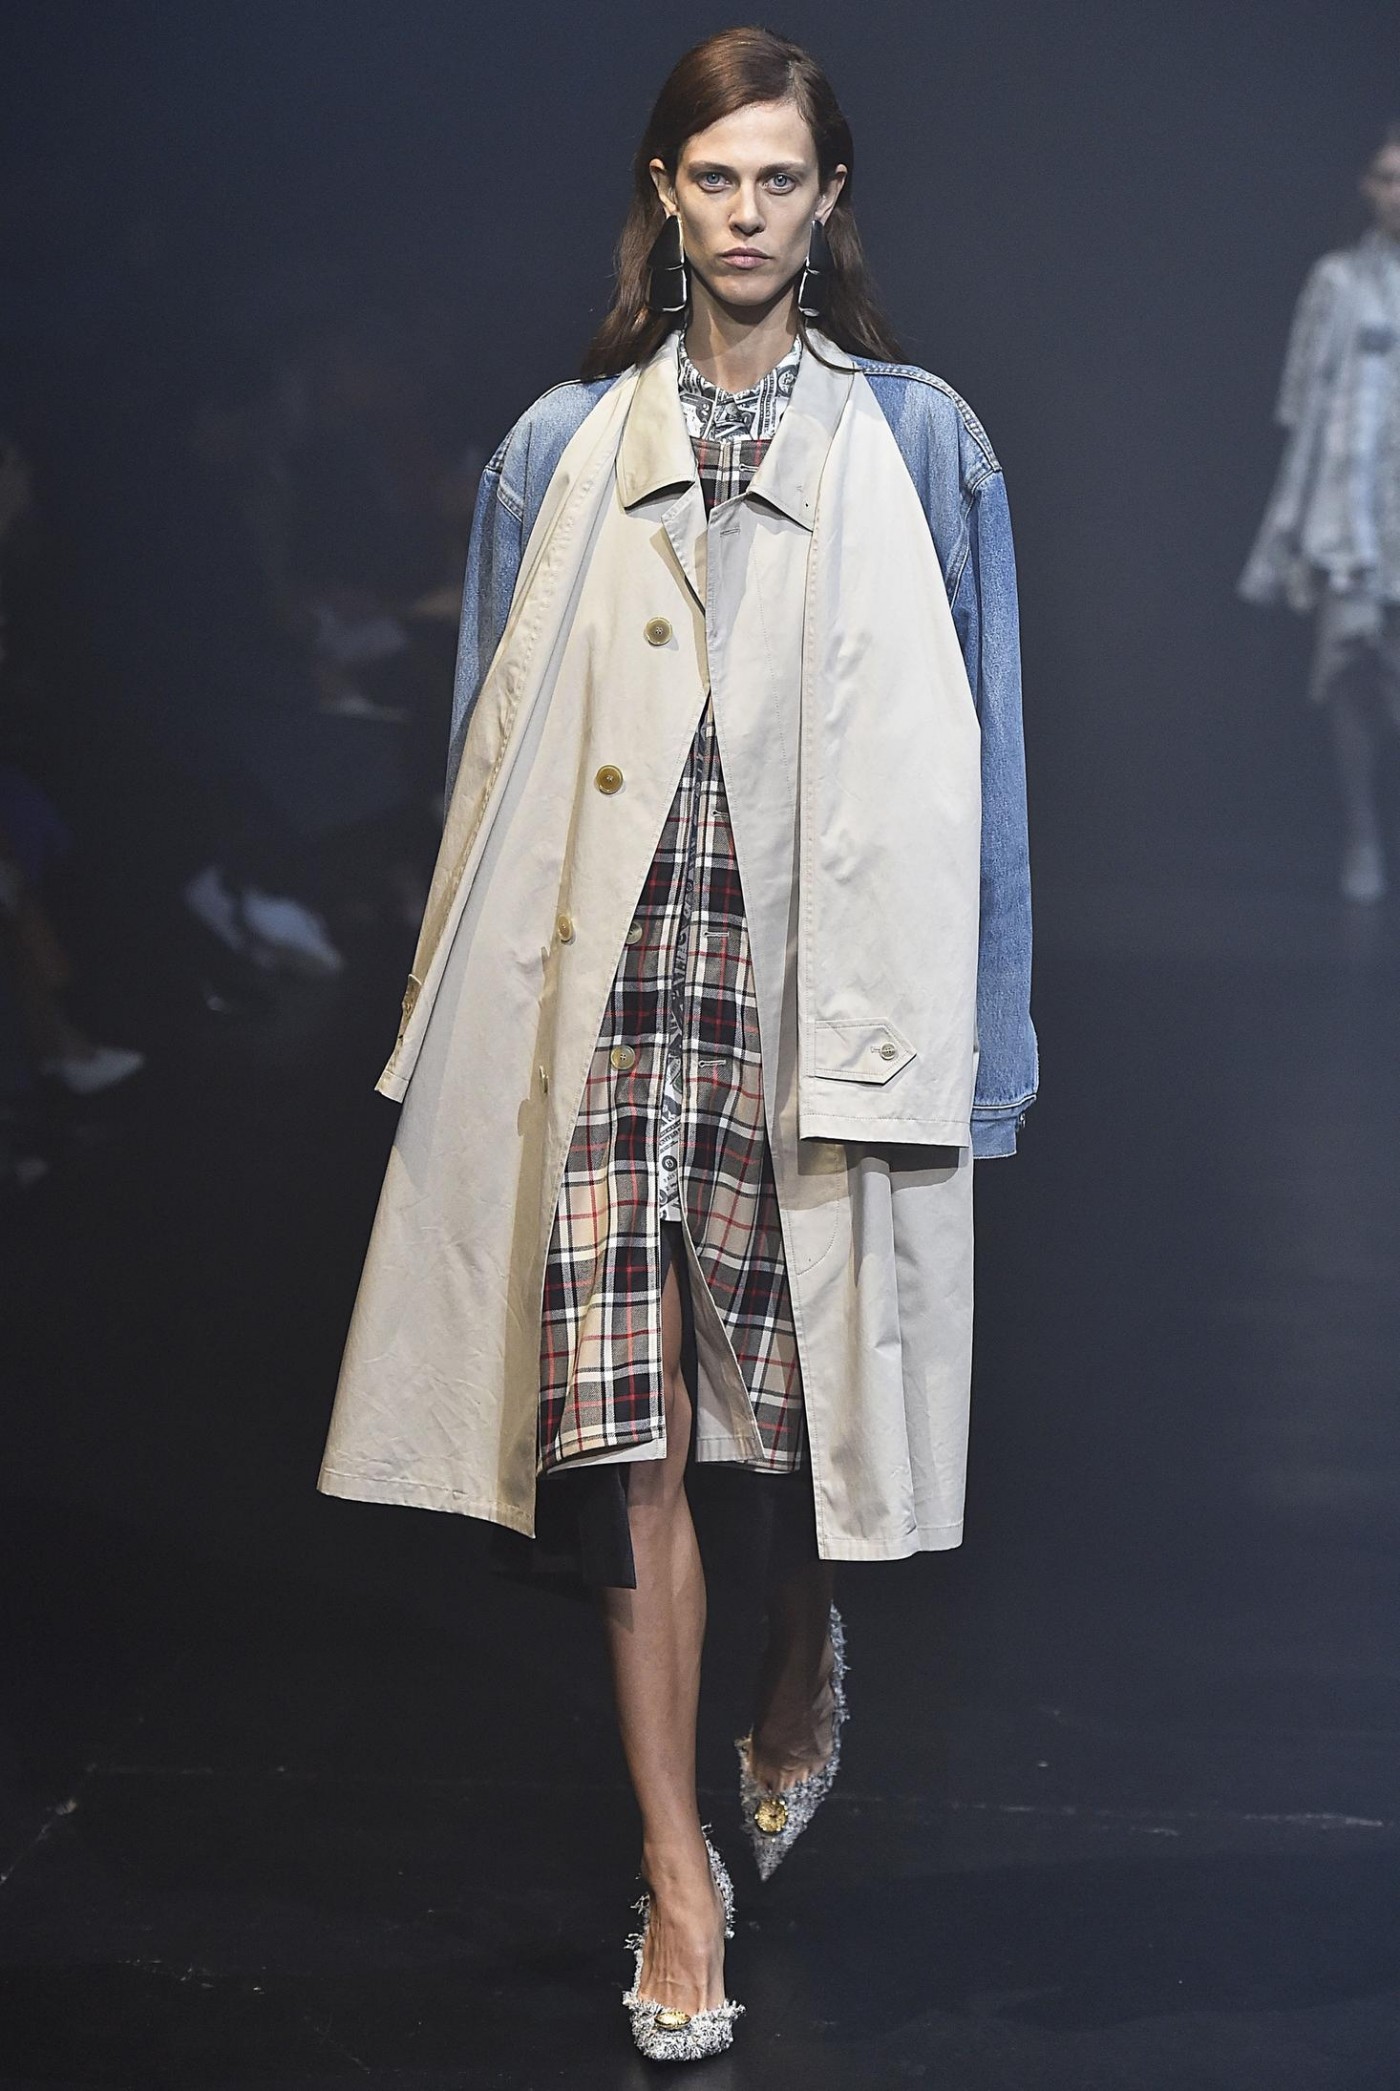 Balenciaga's take on Spring 2018 outerwear is a lesson in deconstruction.